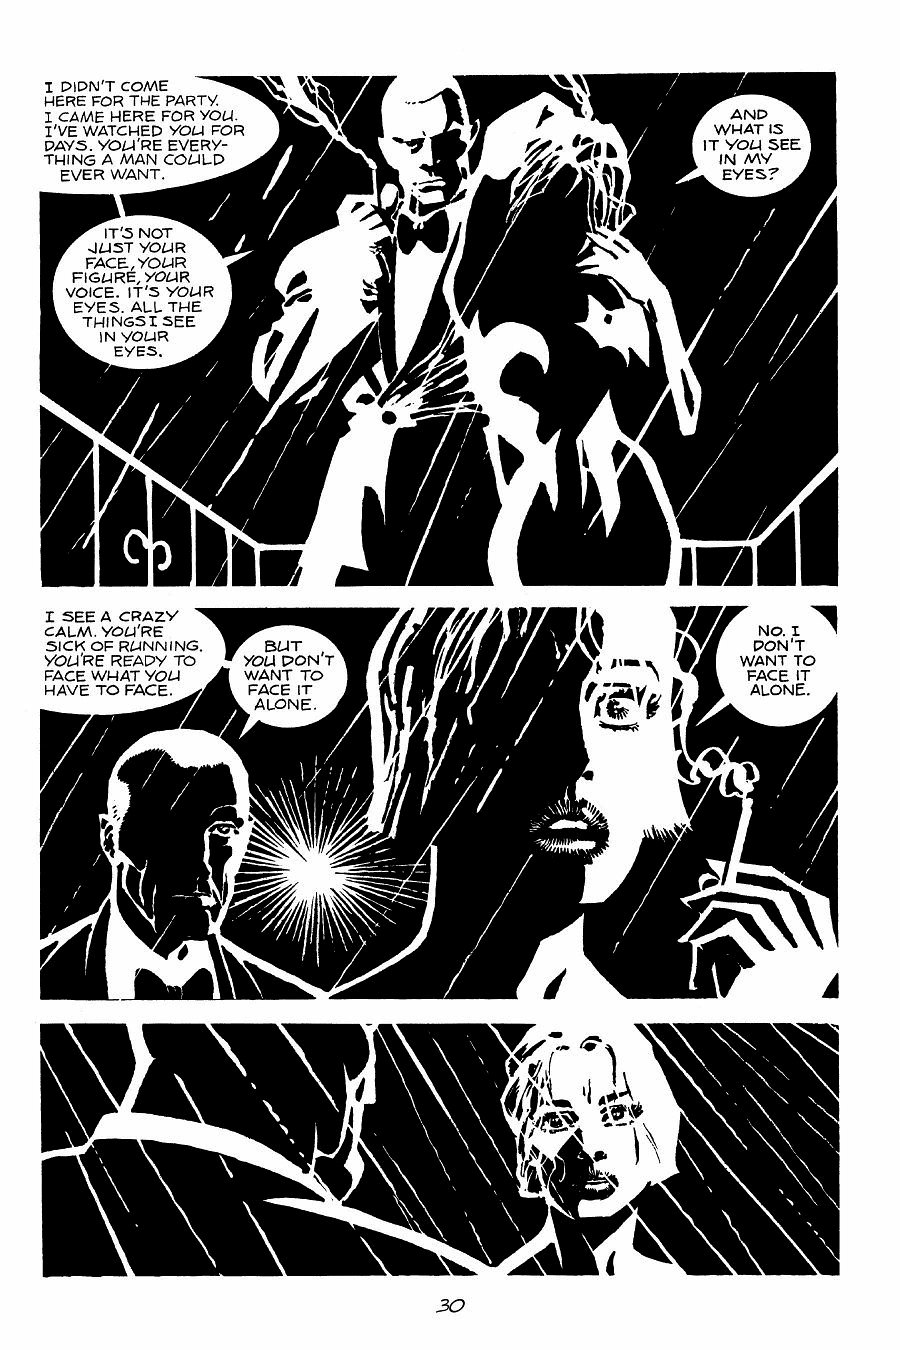 page 30 of sin city 6 booze broads and bullets